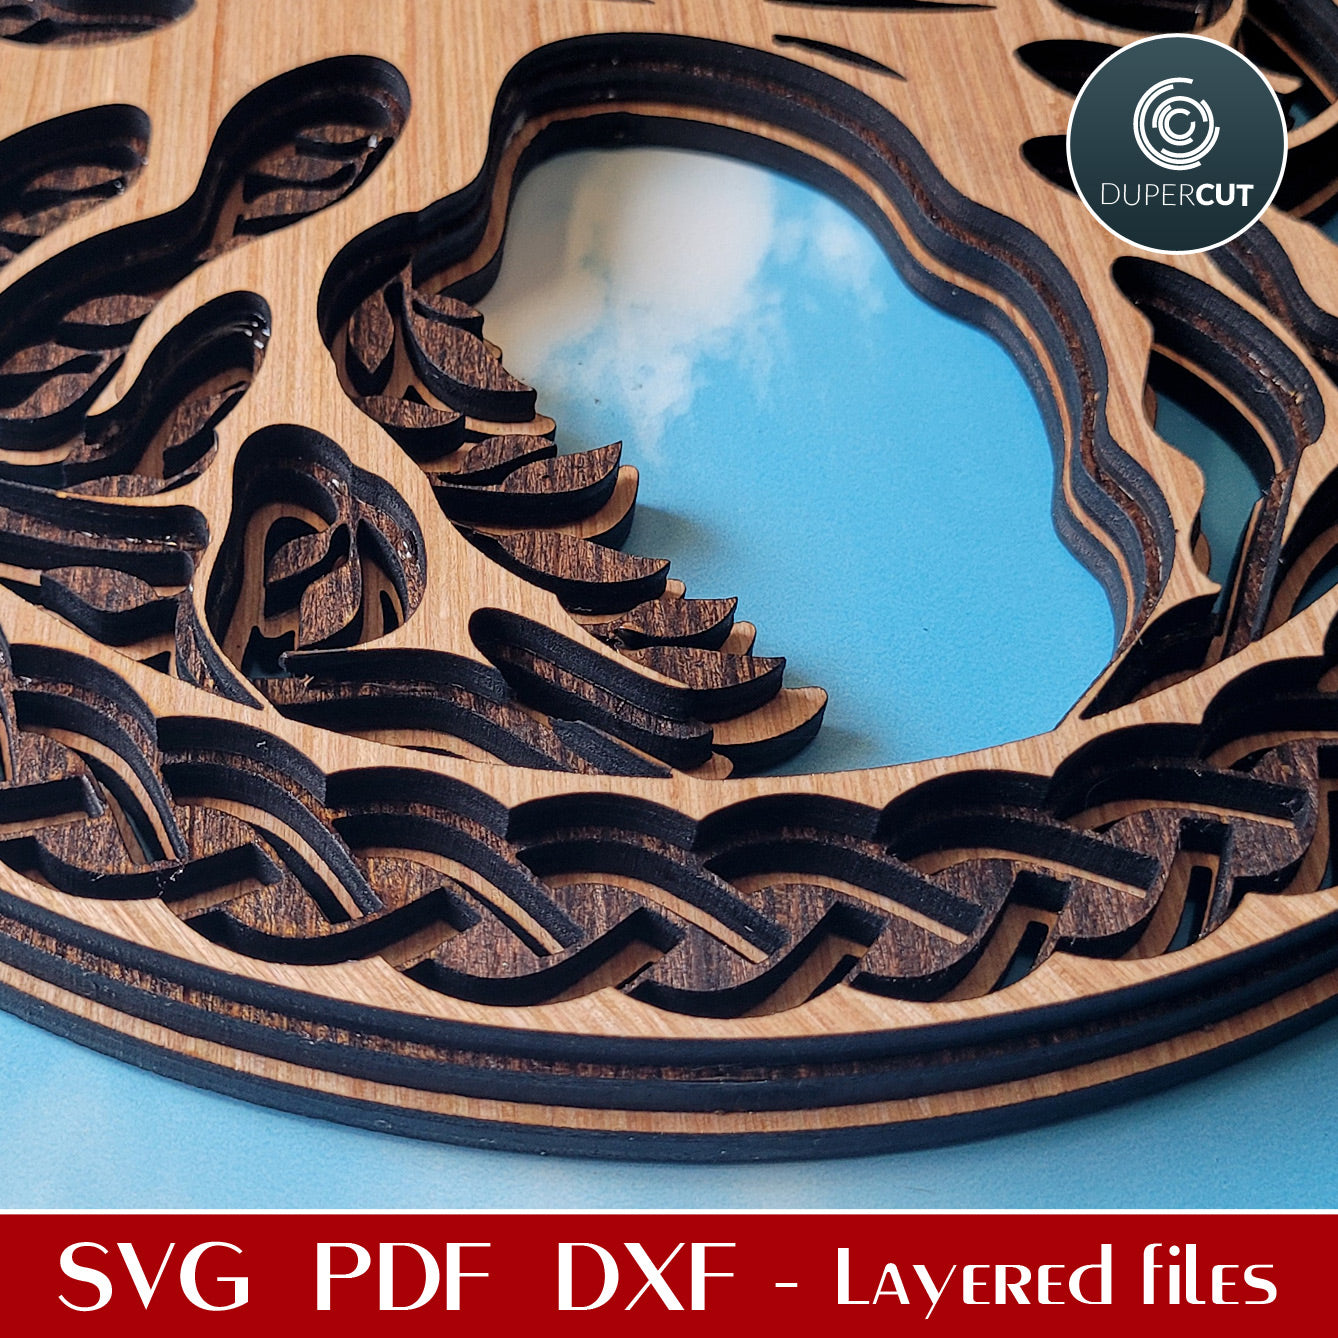 Tree of Life layered wall decoration - SVG DXF vector cutting files for Glowforge, Cricut, Silhouette Cameo, CNC plasma machines, scroll saw pattern by dupercut.com